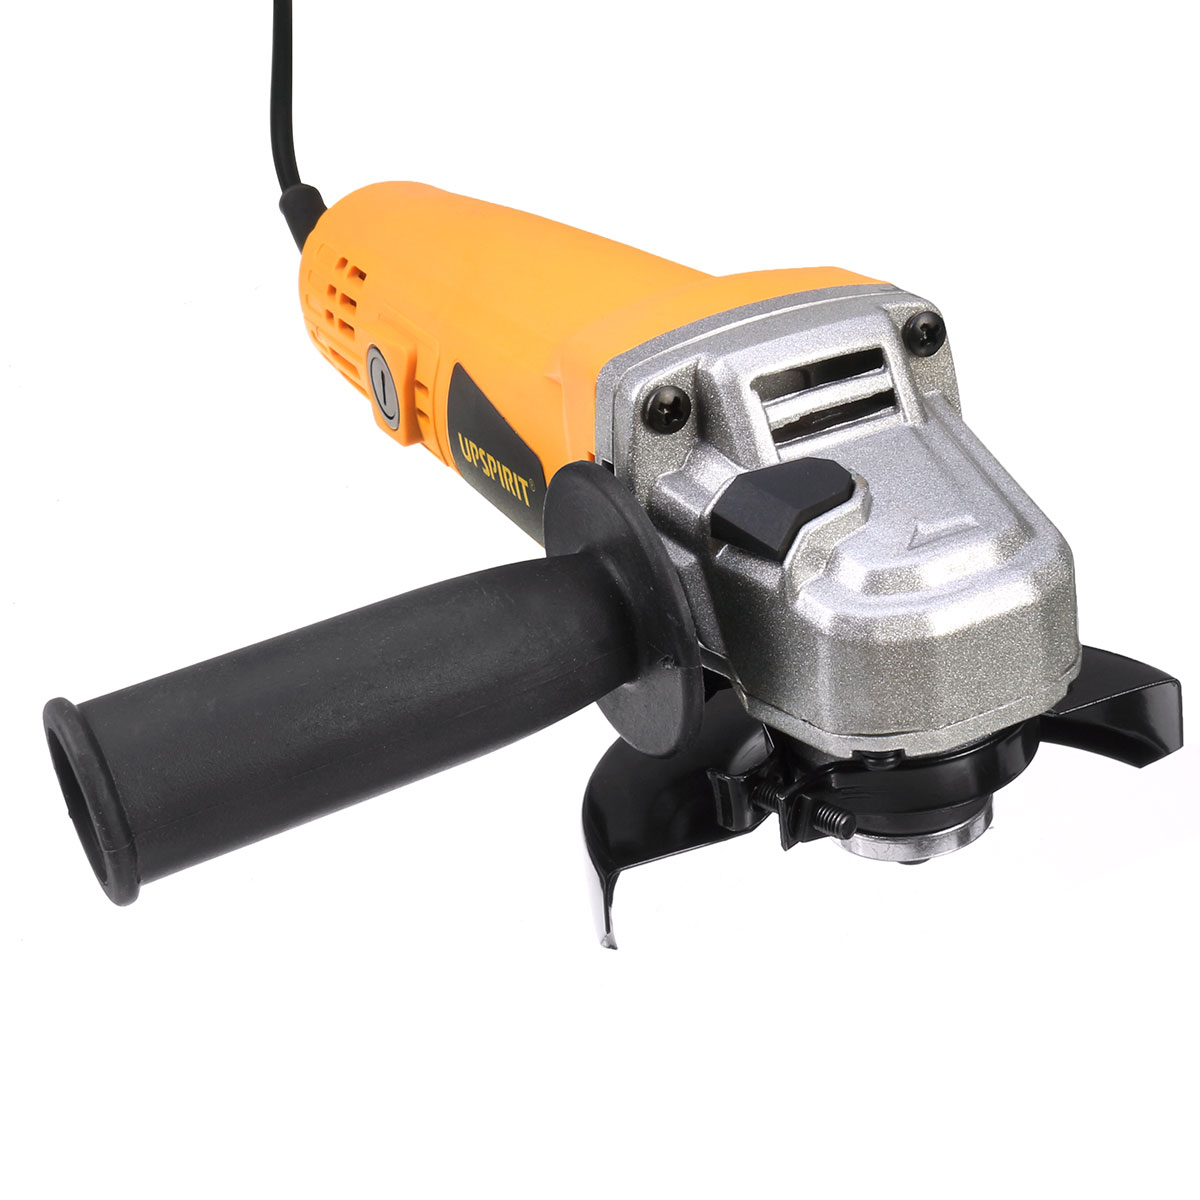 700W-Electric-Angle-Grinder-100mm-Polishing-Polisher-Grinding-Cutting-Tool-10000RPM-1560434-3